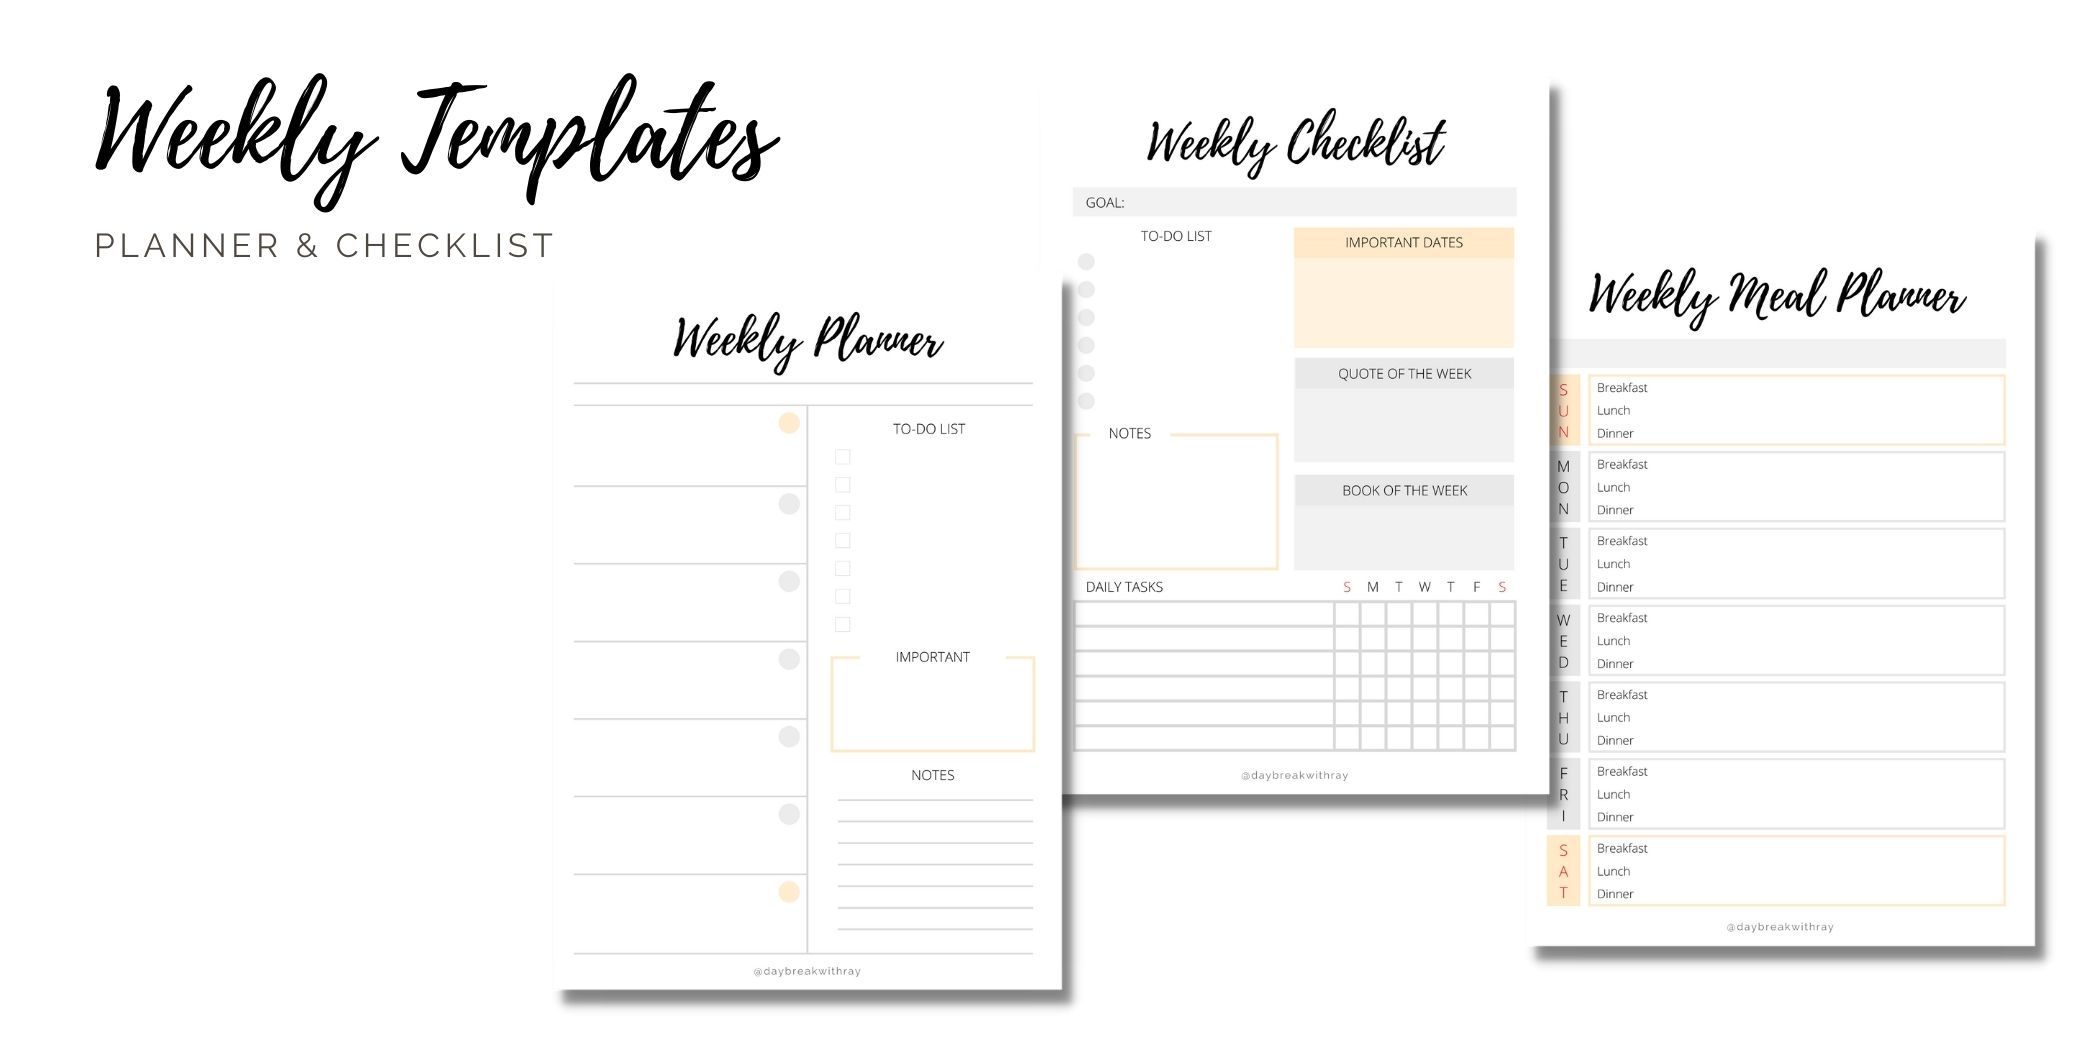 (Featured Image) Daybreak Weekly Template